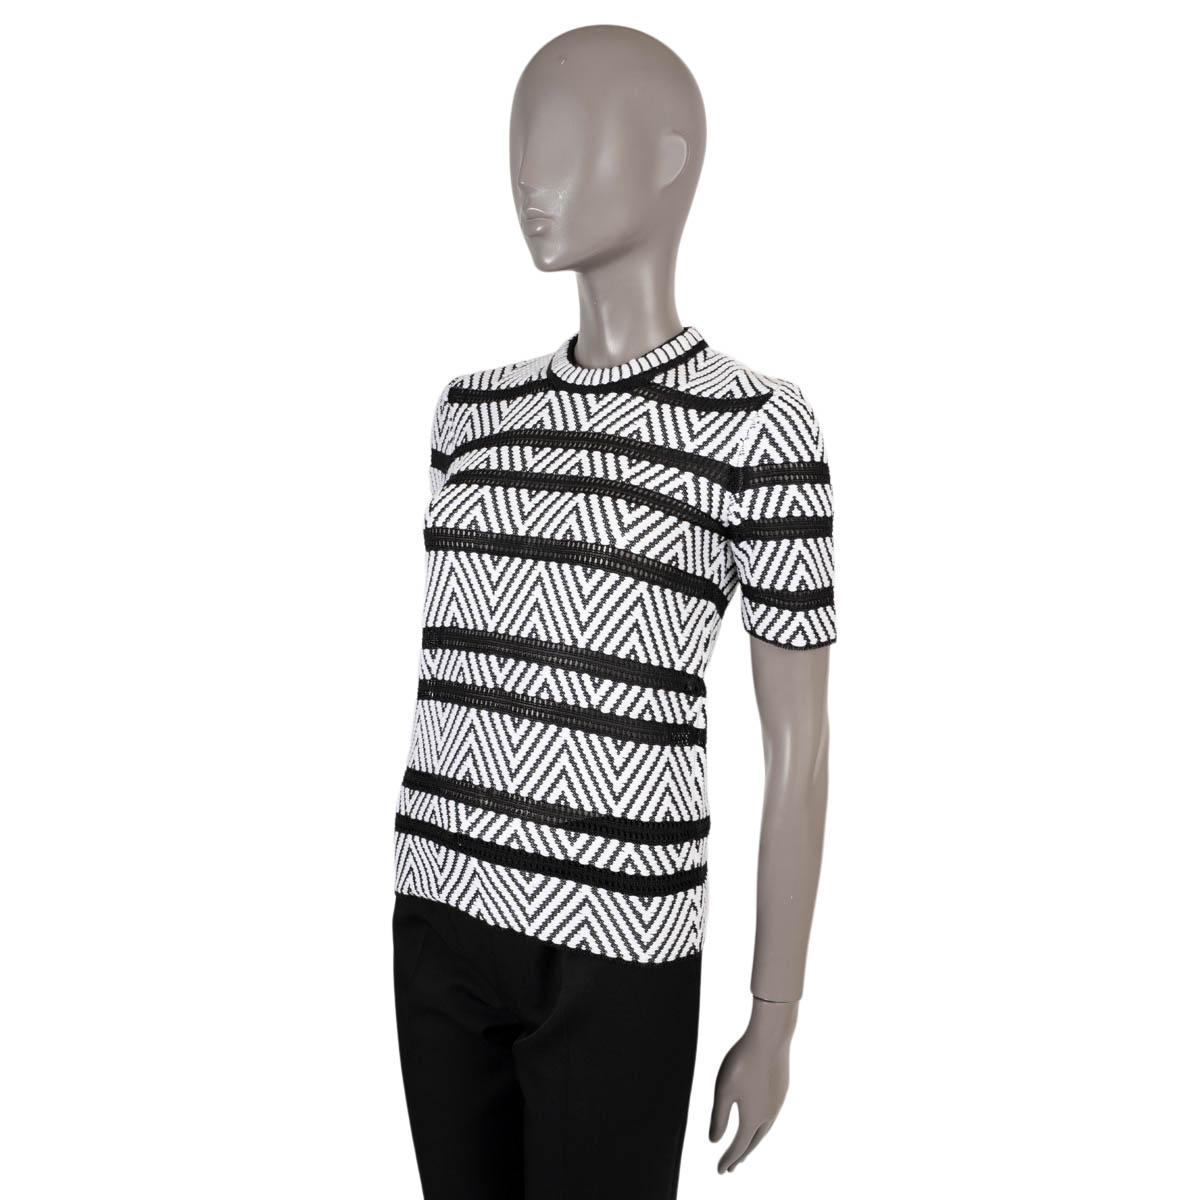 100% authentic Louis Vuitton pointelle striped chevron jacquard knit short sleeve sweater in back and white cotton (74%) and polyamide (26%). The design features sheer black pointelle panels and is unlined. Has been worn and is in excellent